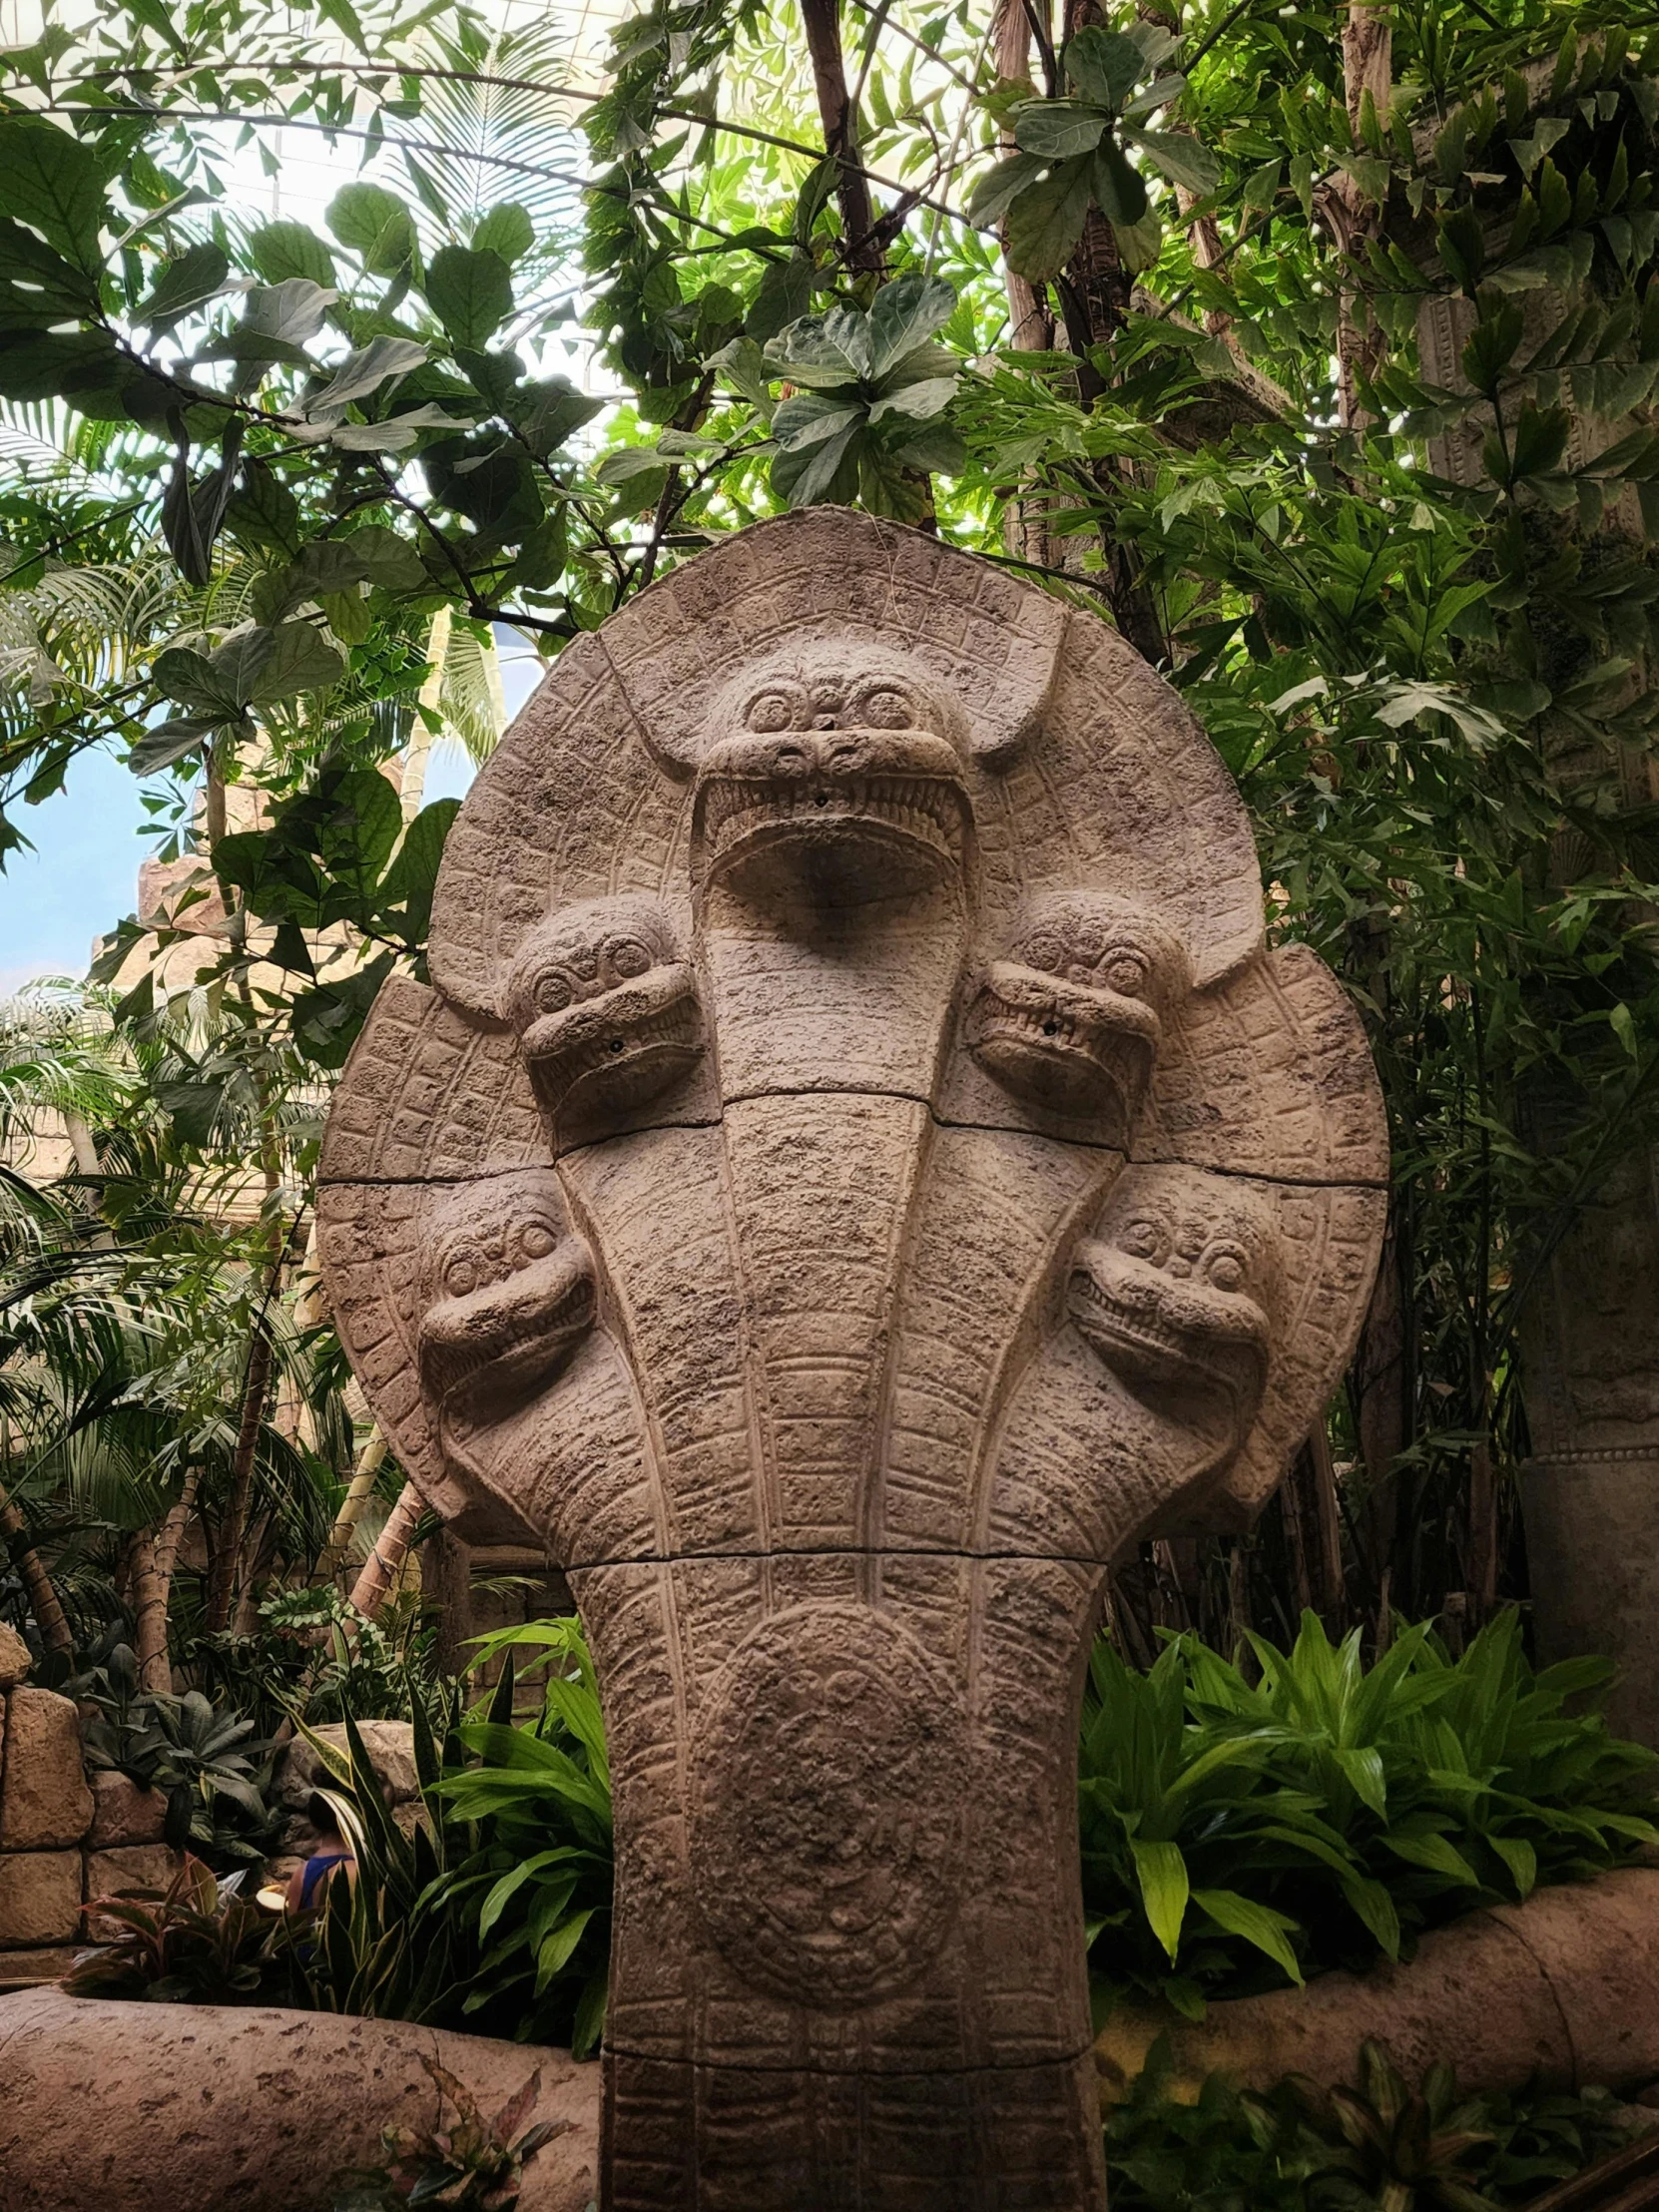 this stone sculpture is in the center of a garden